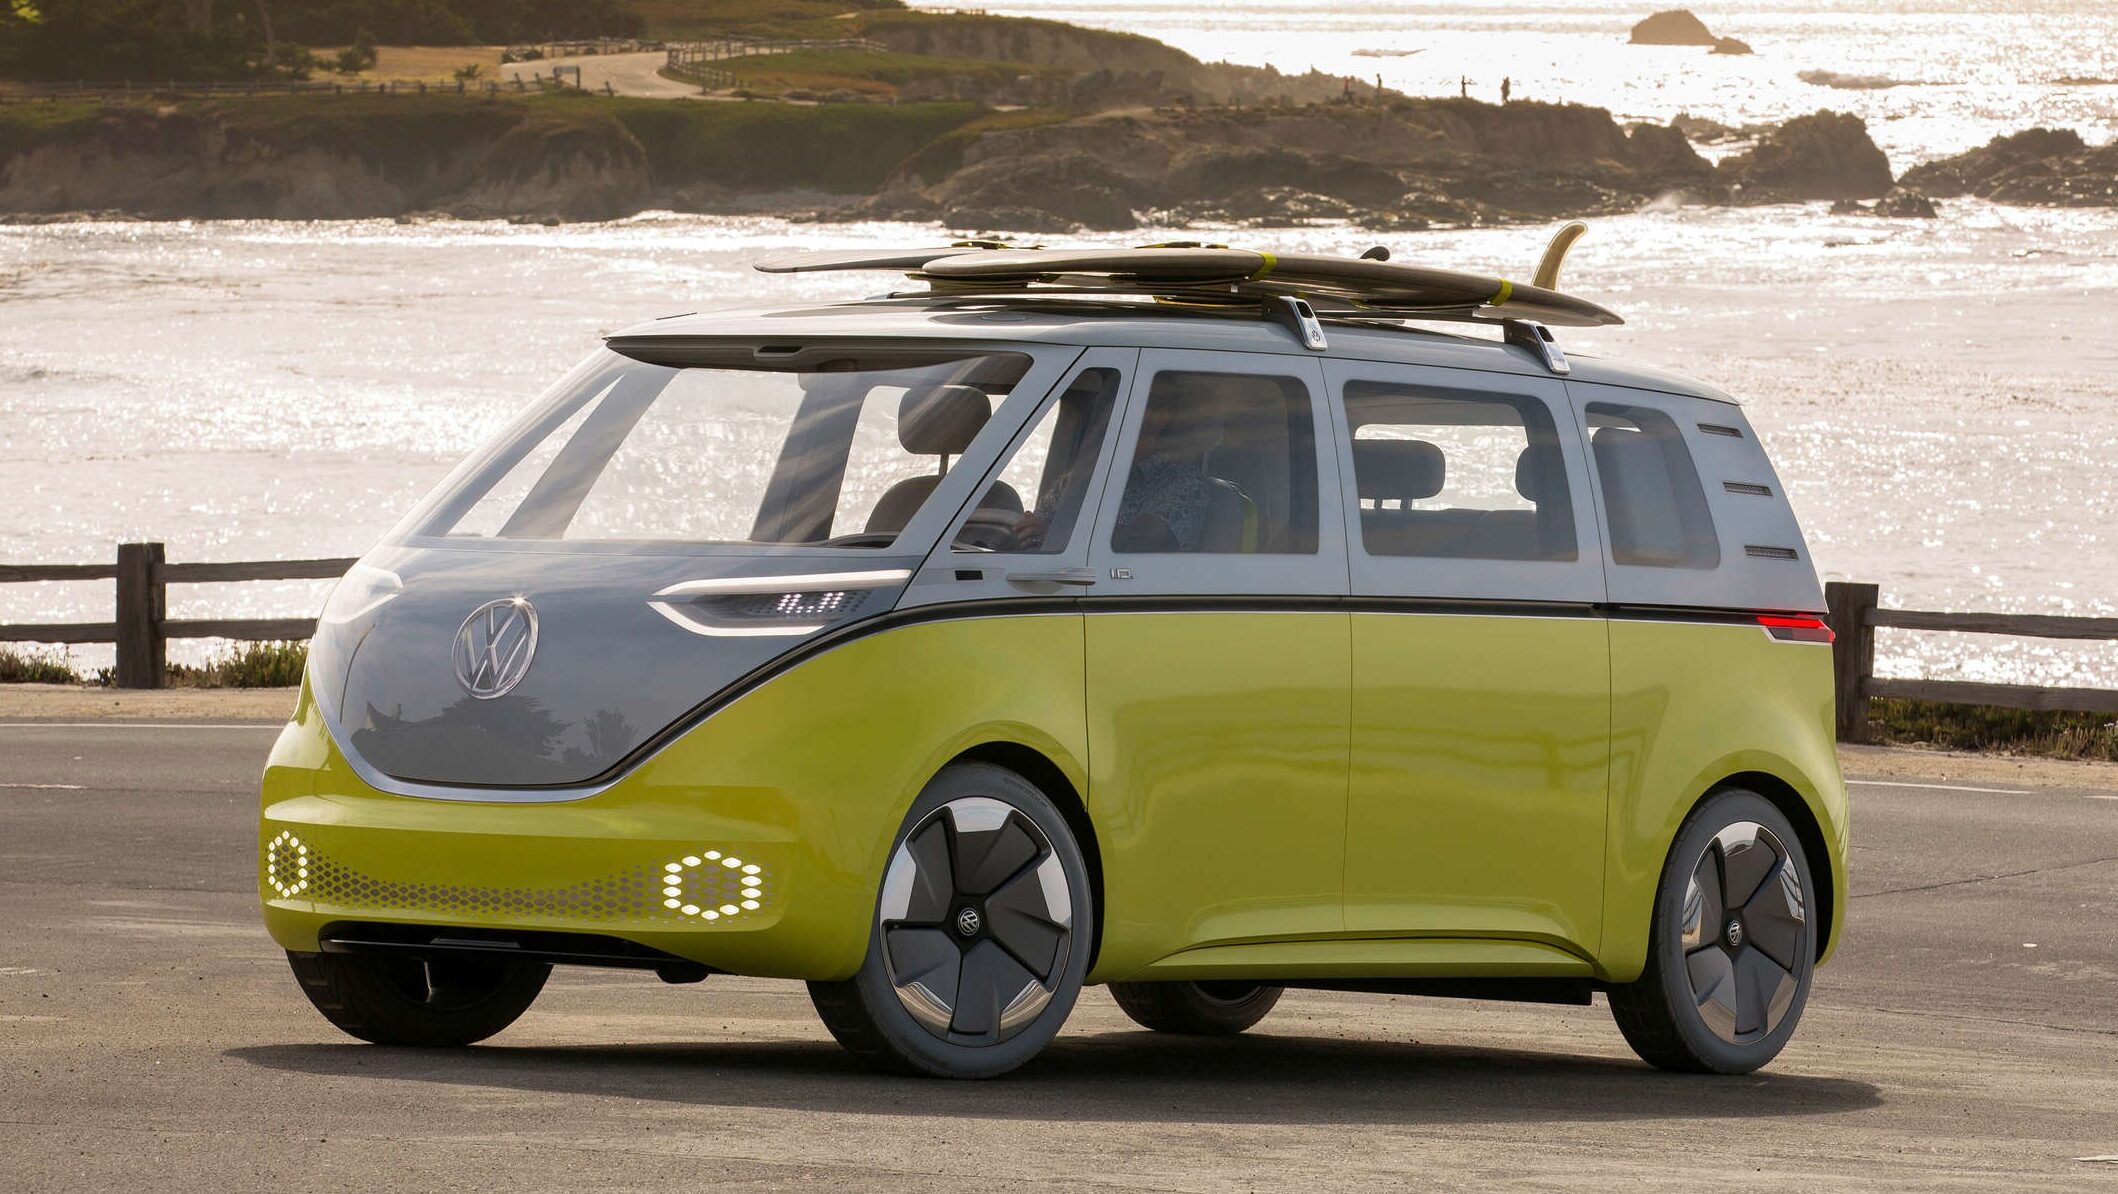 VW ID.Buzz Camper Van Delayed Because It’s Too Heavy for Normal Licenses: Report